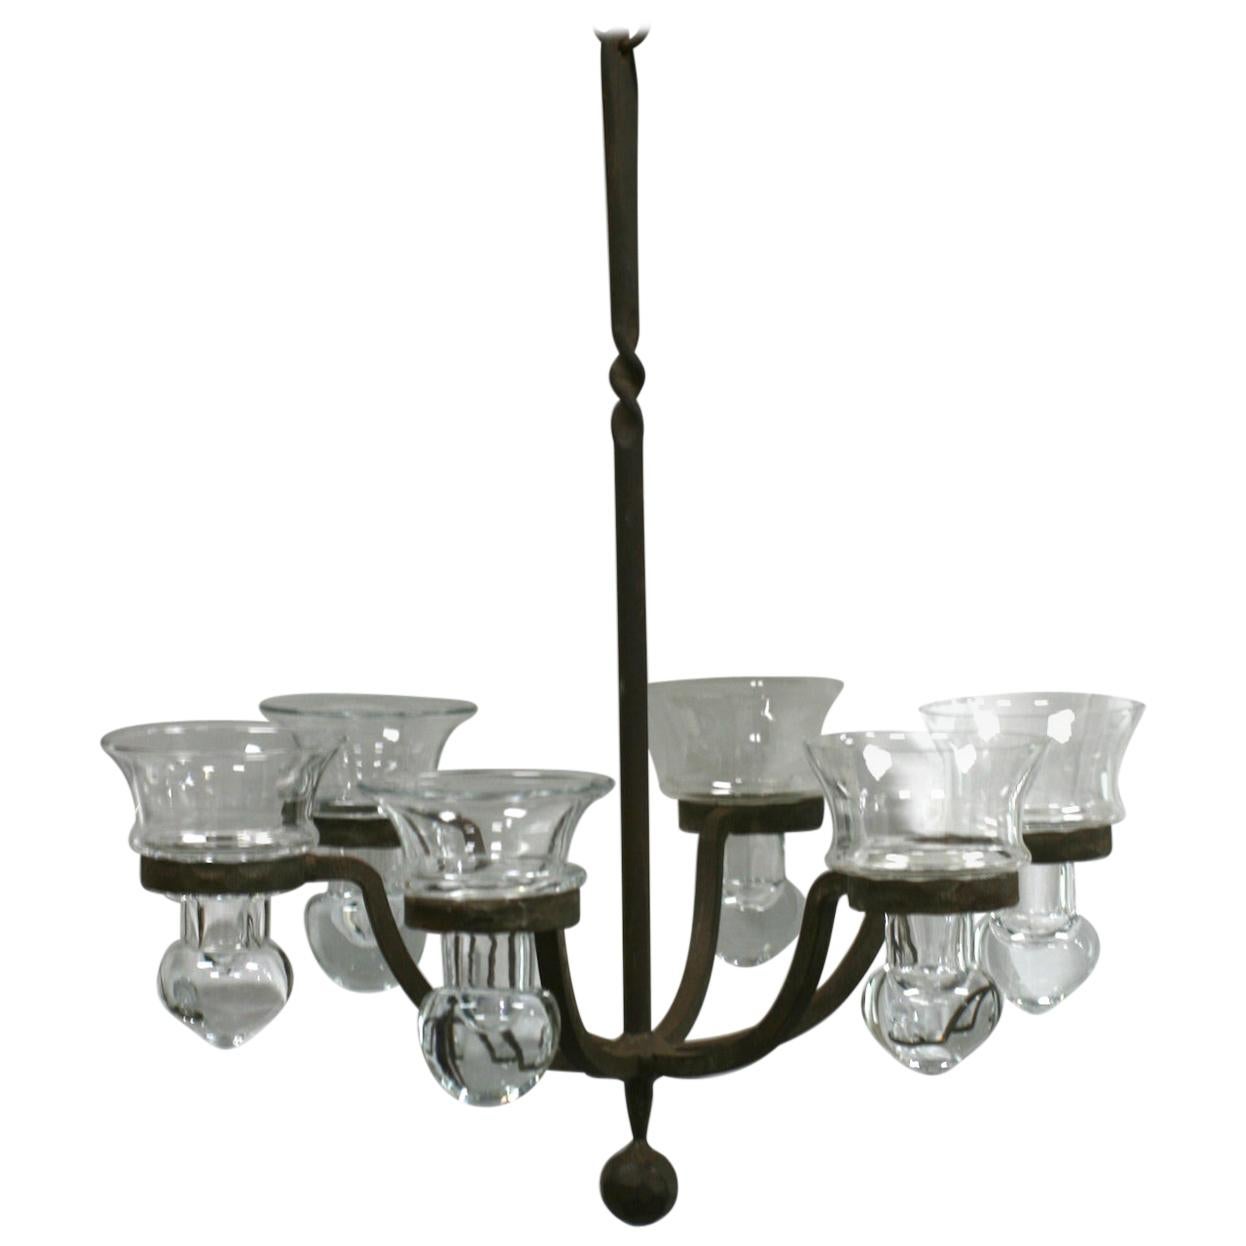 Iron Chandelier for Air Ferns or Votives